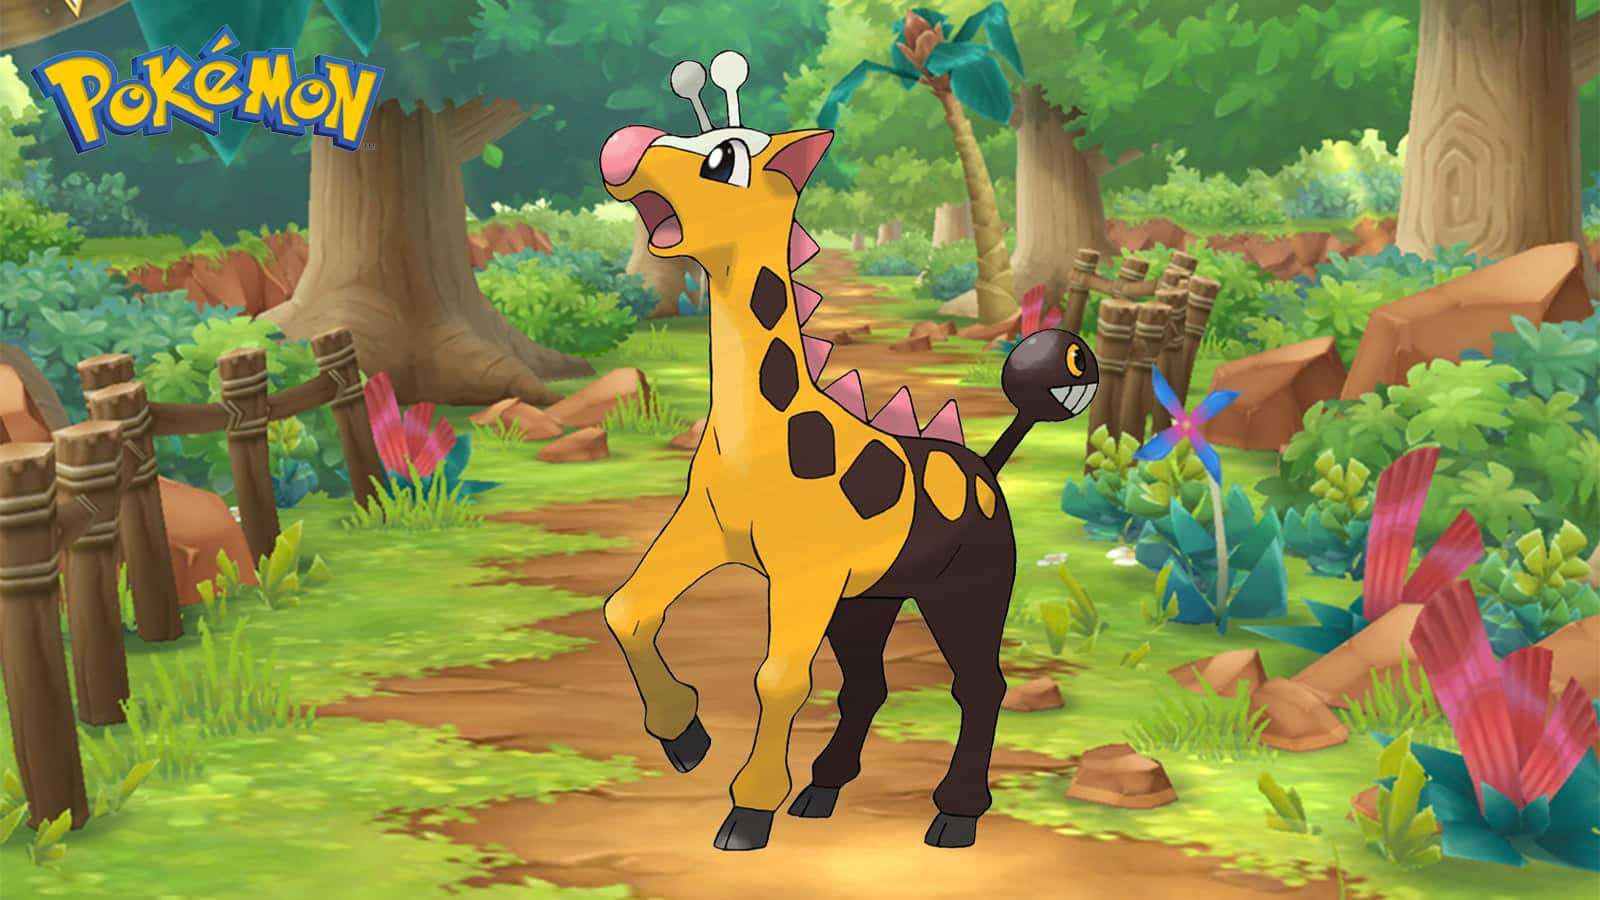 Girafarig appearing in Pokemon with its weaknesses